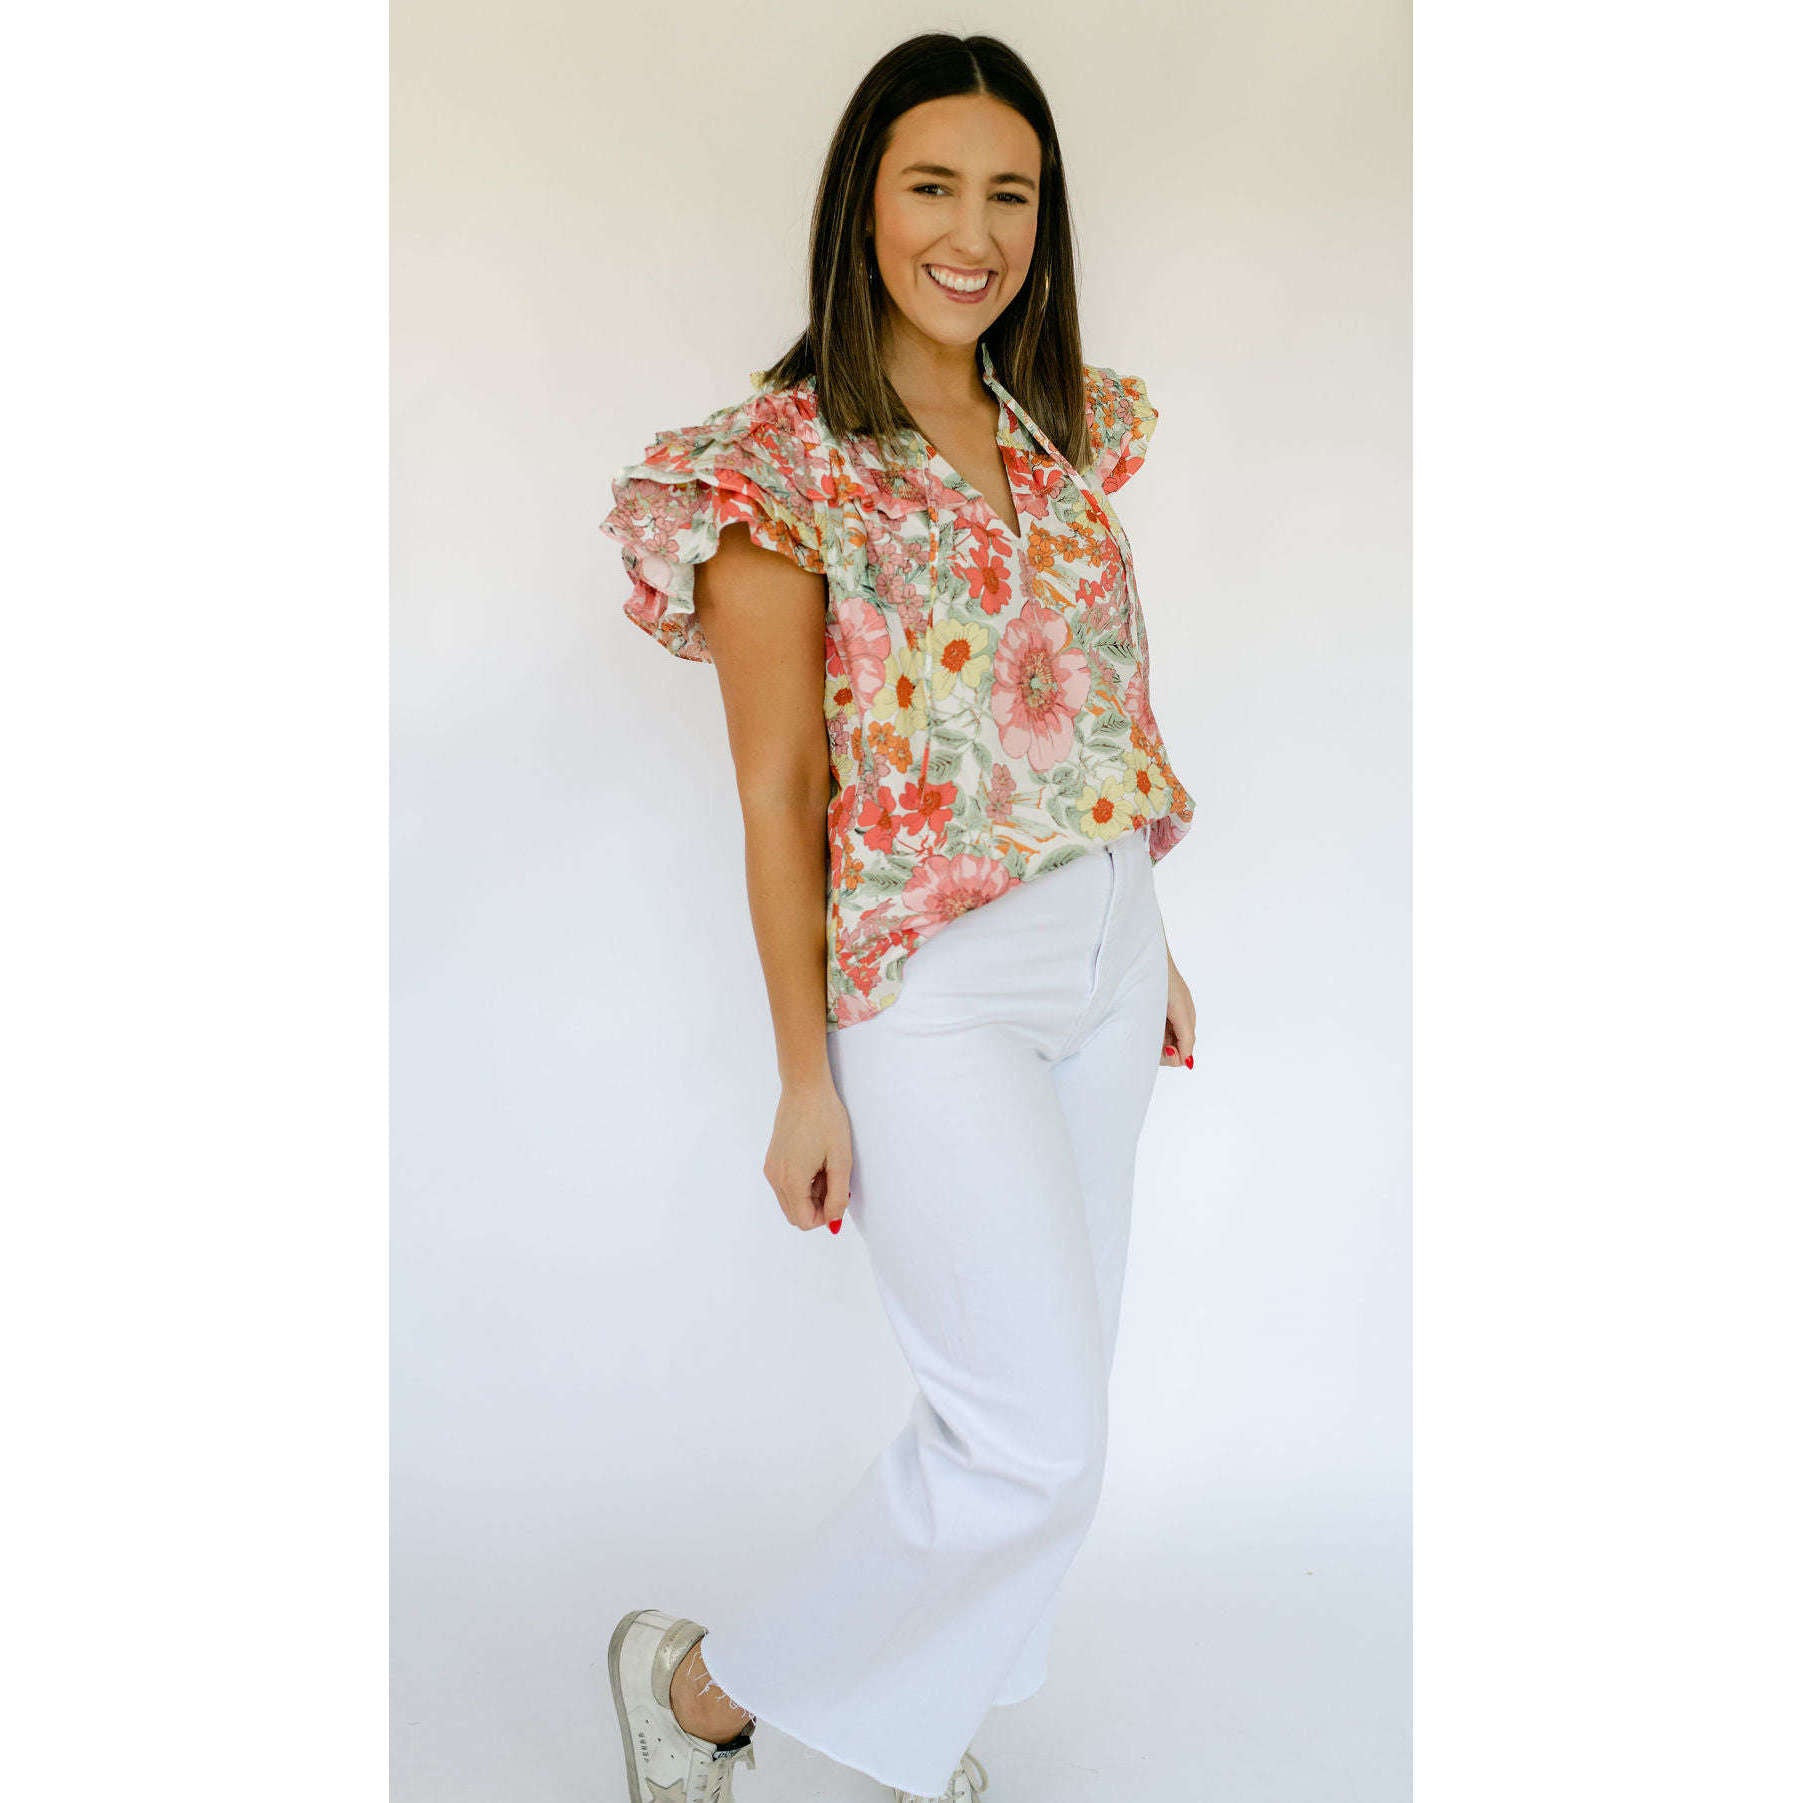 8.28 Boutique:Buddy Love,Buddy Love Carla Whimsy Top,Tops